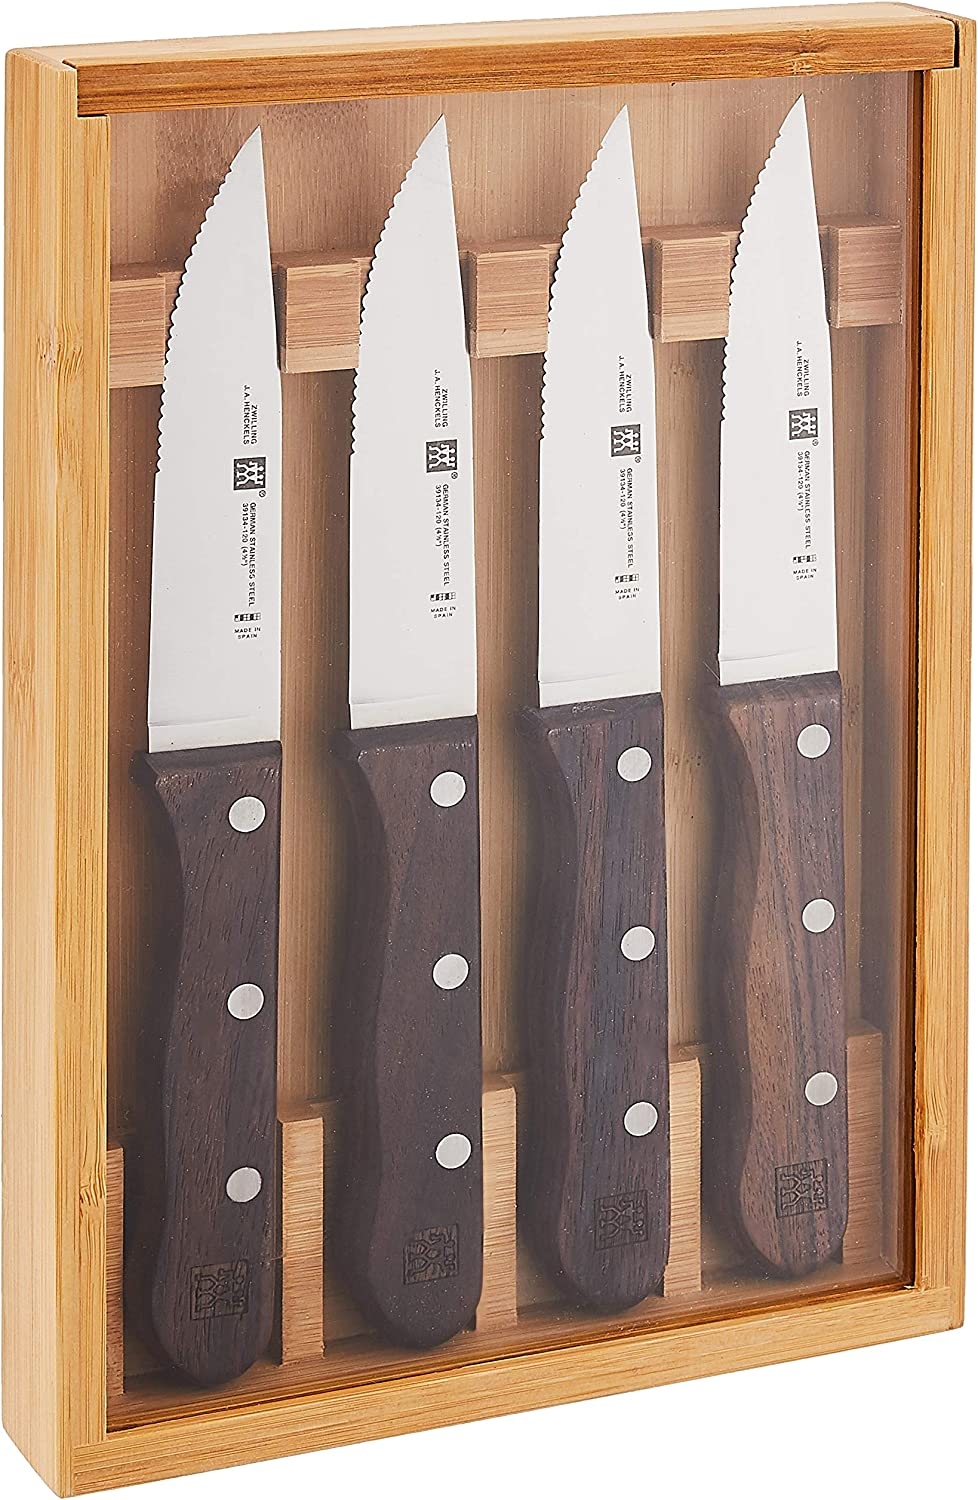 ZWILLING J.A. Henckels Cheese Knife Set, 3-pc, Stainless Steel Import To Shop ×Product customization General Description